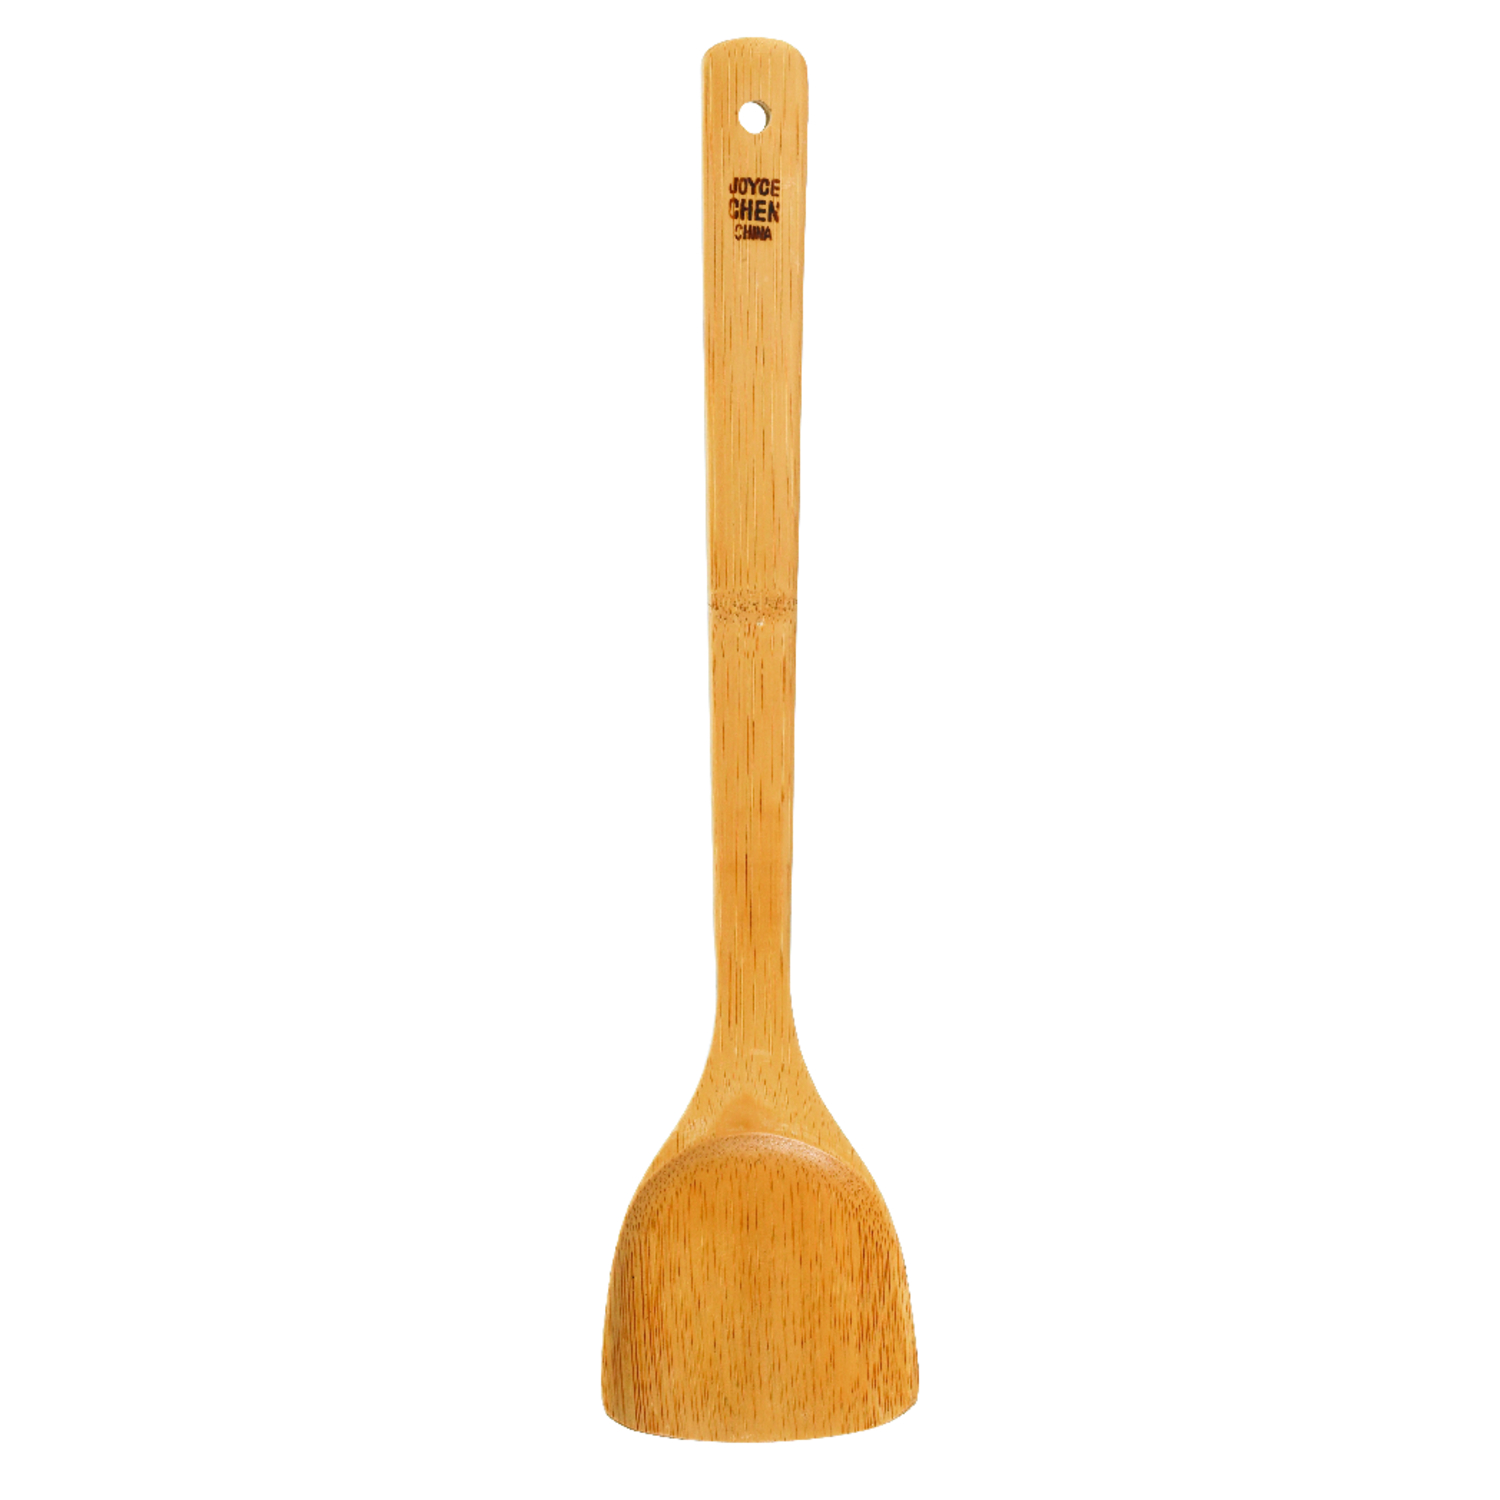 Photos - Other Accessories Joyce Chen Natural Bamboo Angled Spatula 33-2048